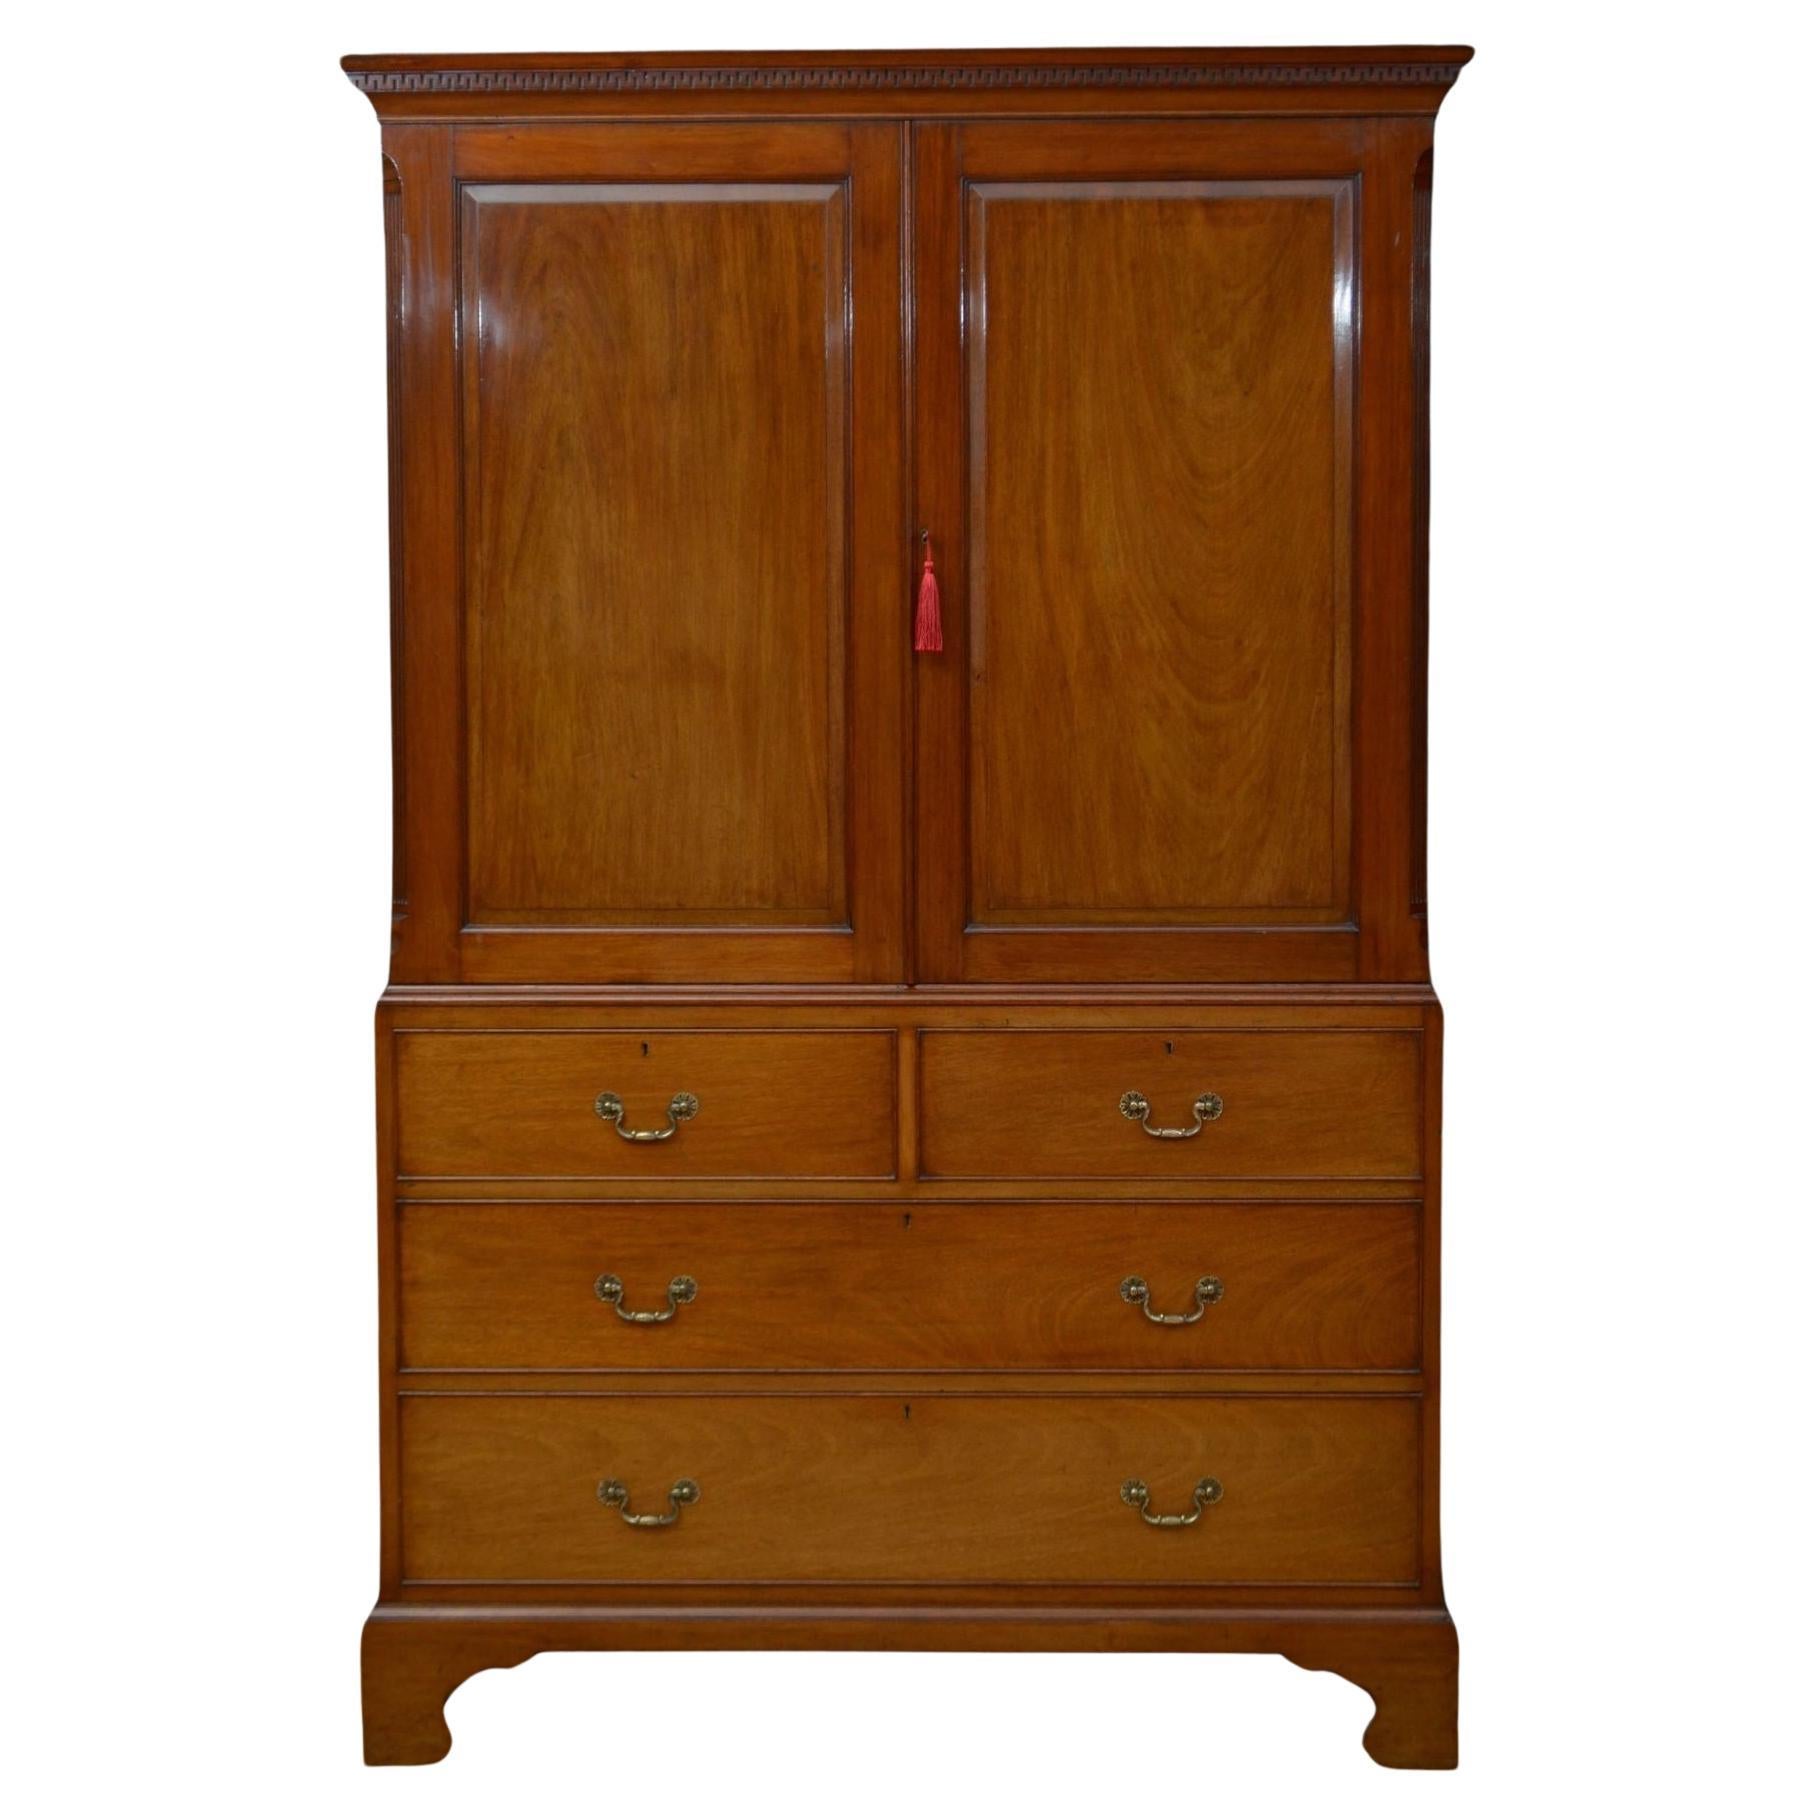 Finest quality Edwardian Solid Mahogany Linen Press For Sale